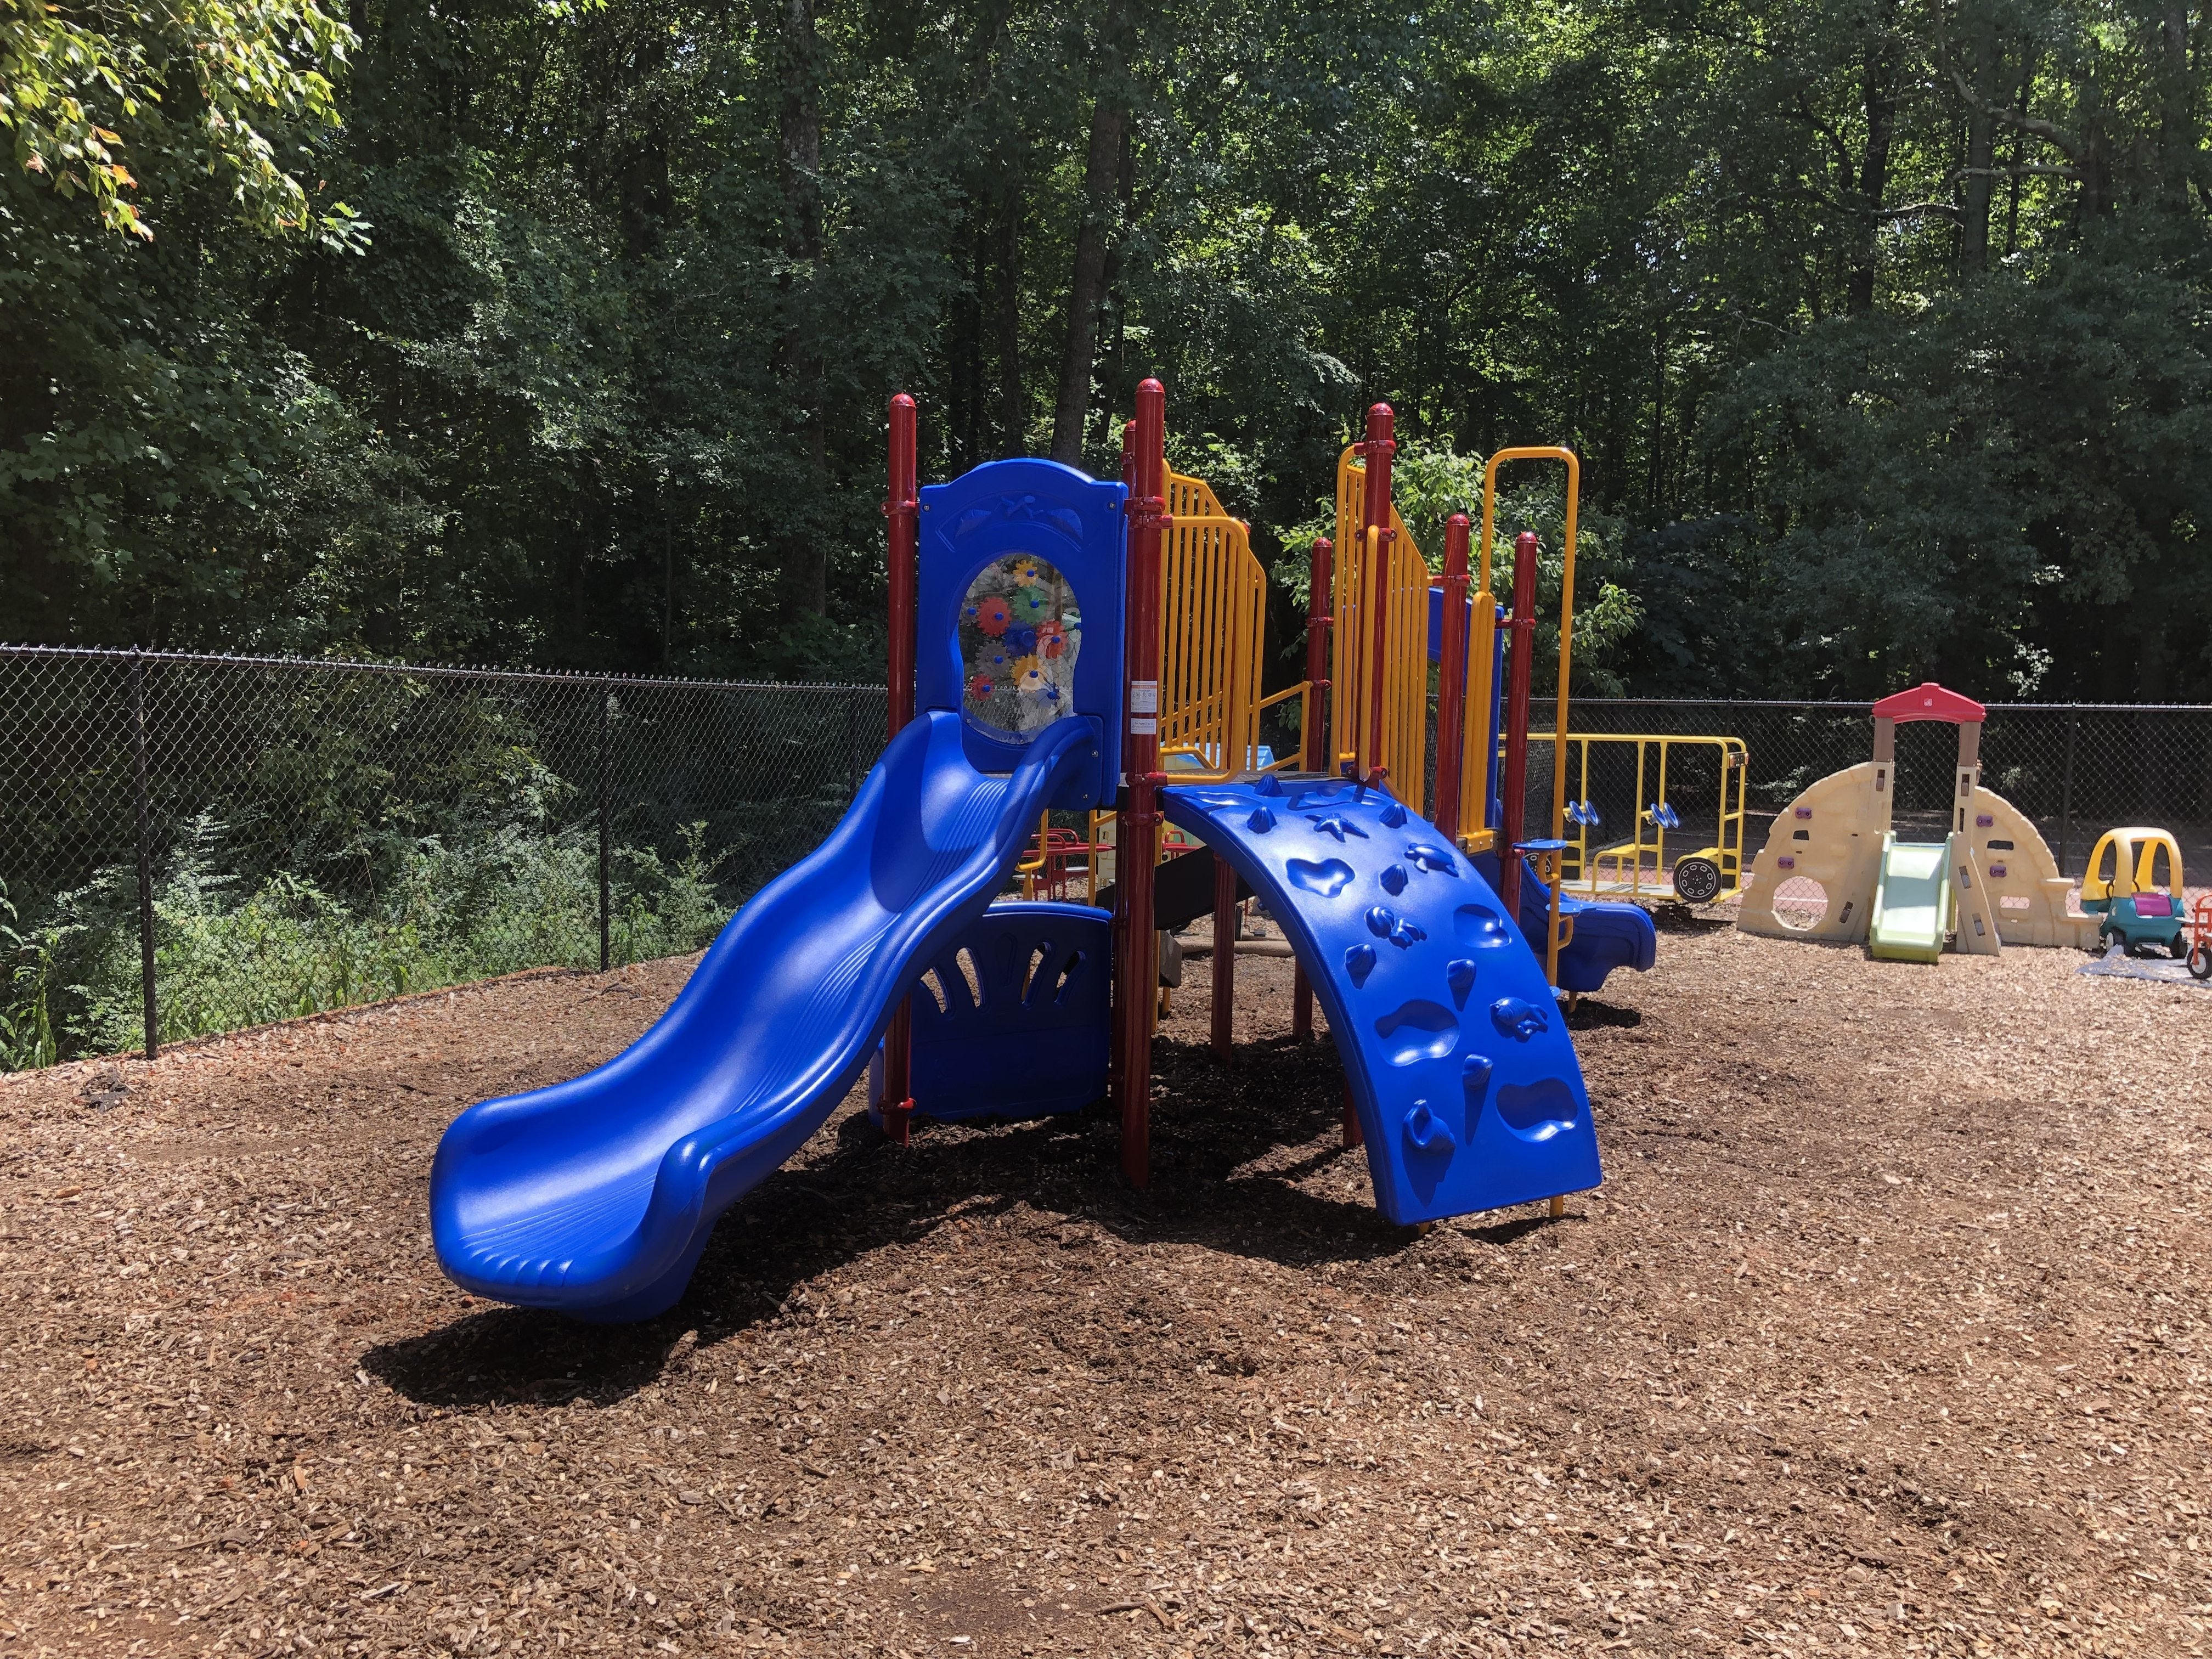 Grand Cove Play System Actual Image